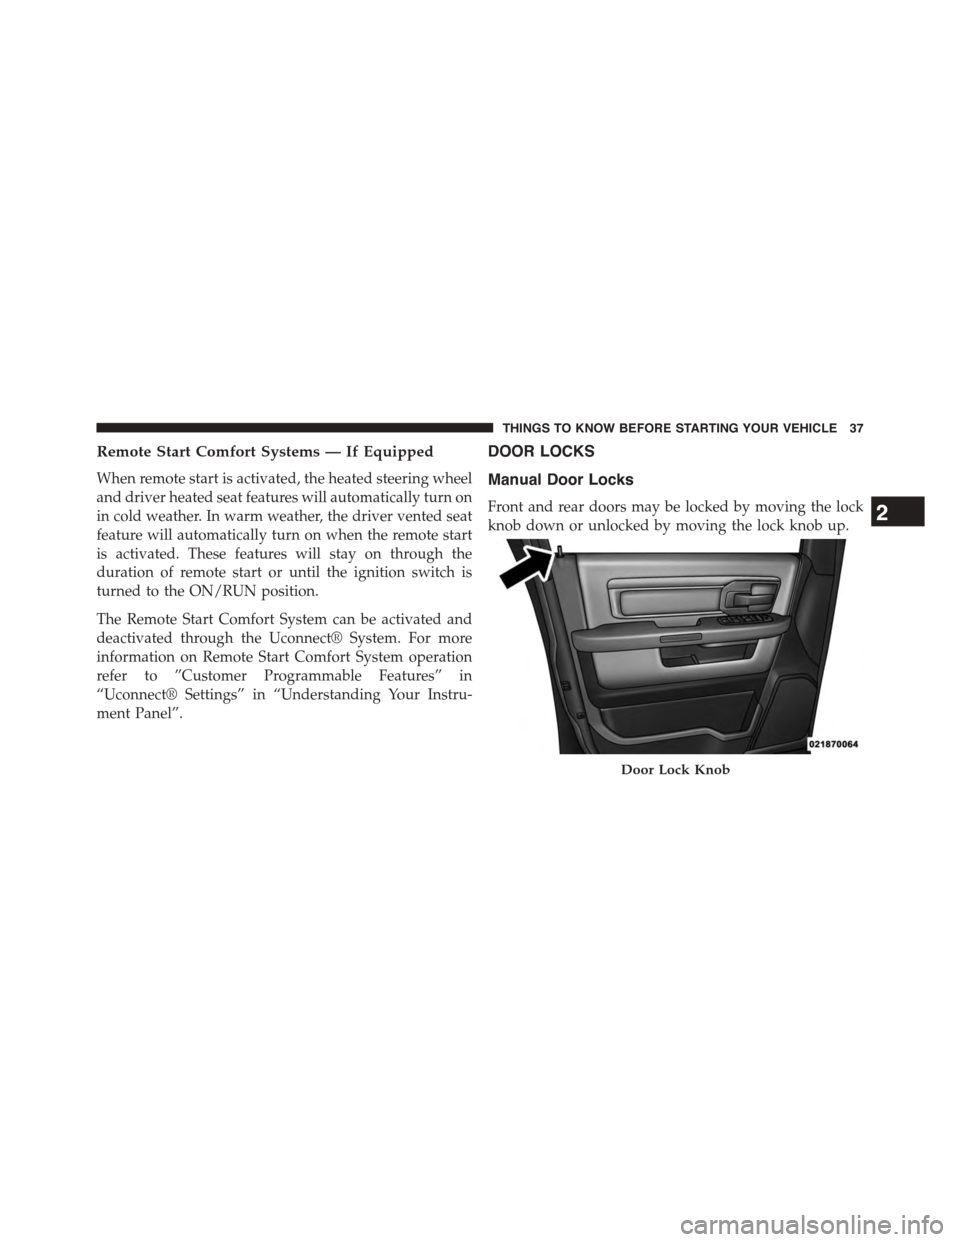 Ram 1500 2015  Owners Manual Remote Start Comfort Systems — If Equipped
When remote start is activated, the heated steering wheel
and driver heated seat features will automatically turn on
in cold weather. In warm weather, the 